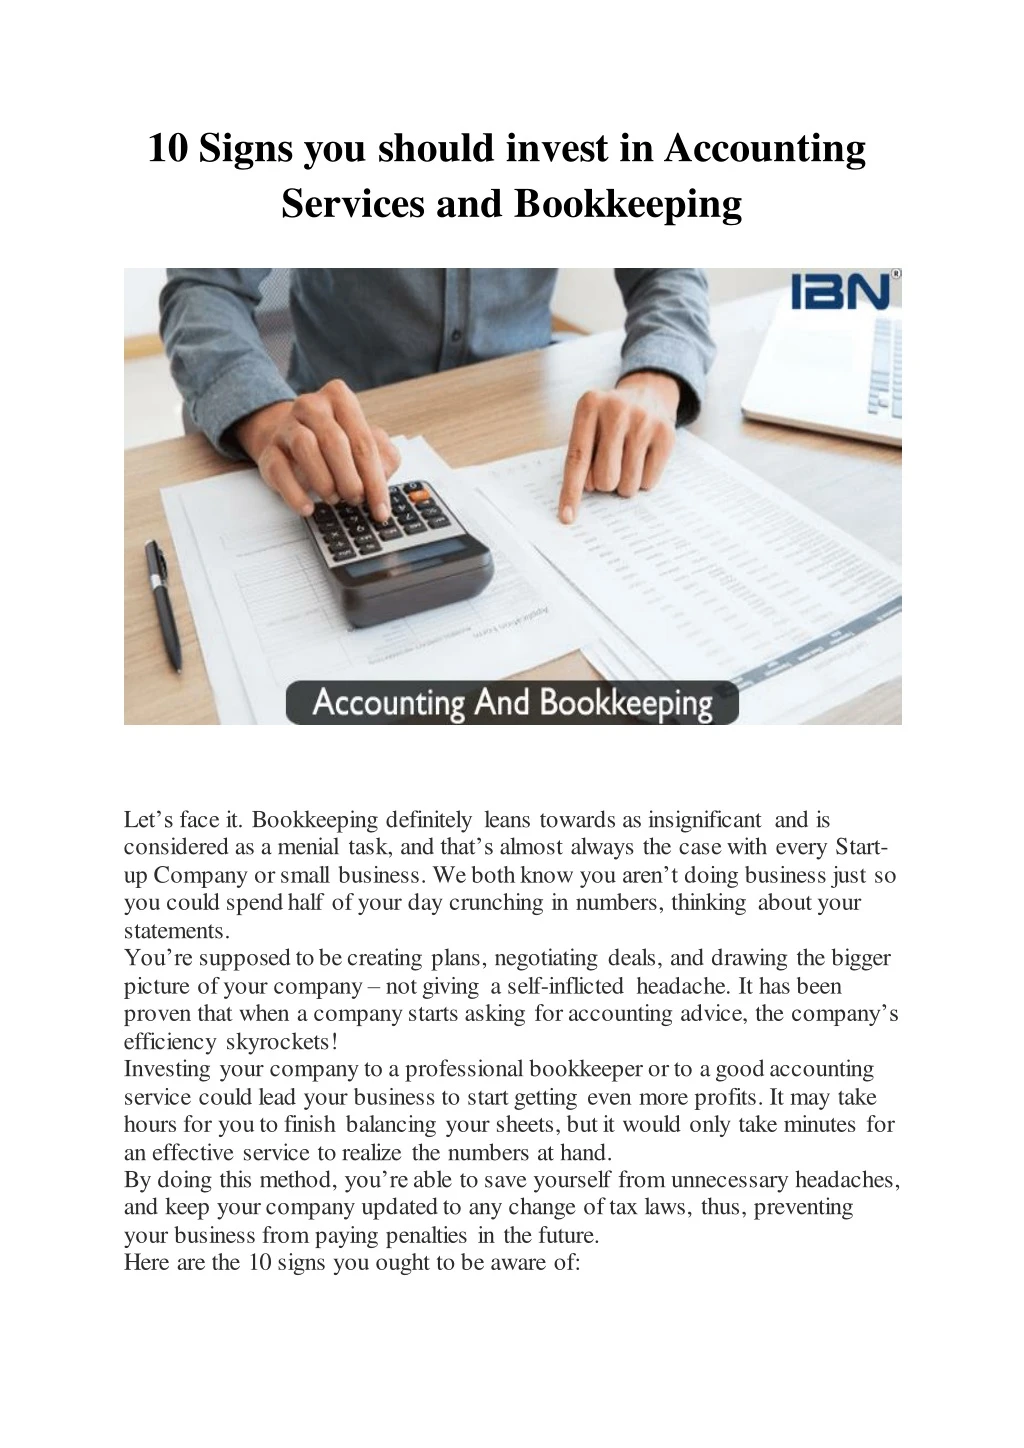 10 signs you should invest in accounting services